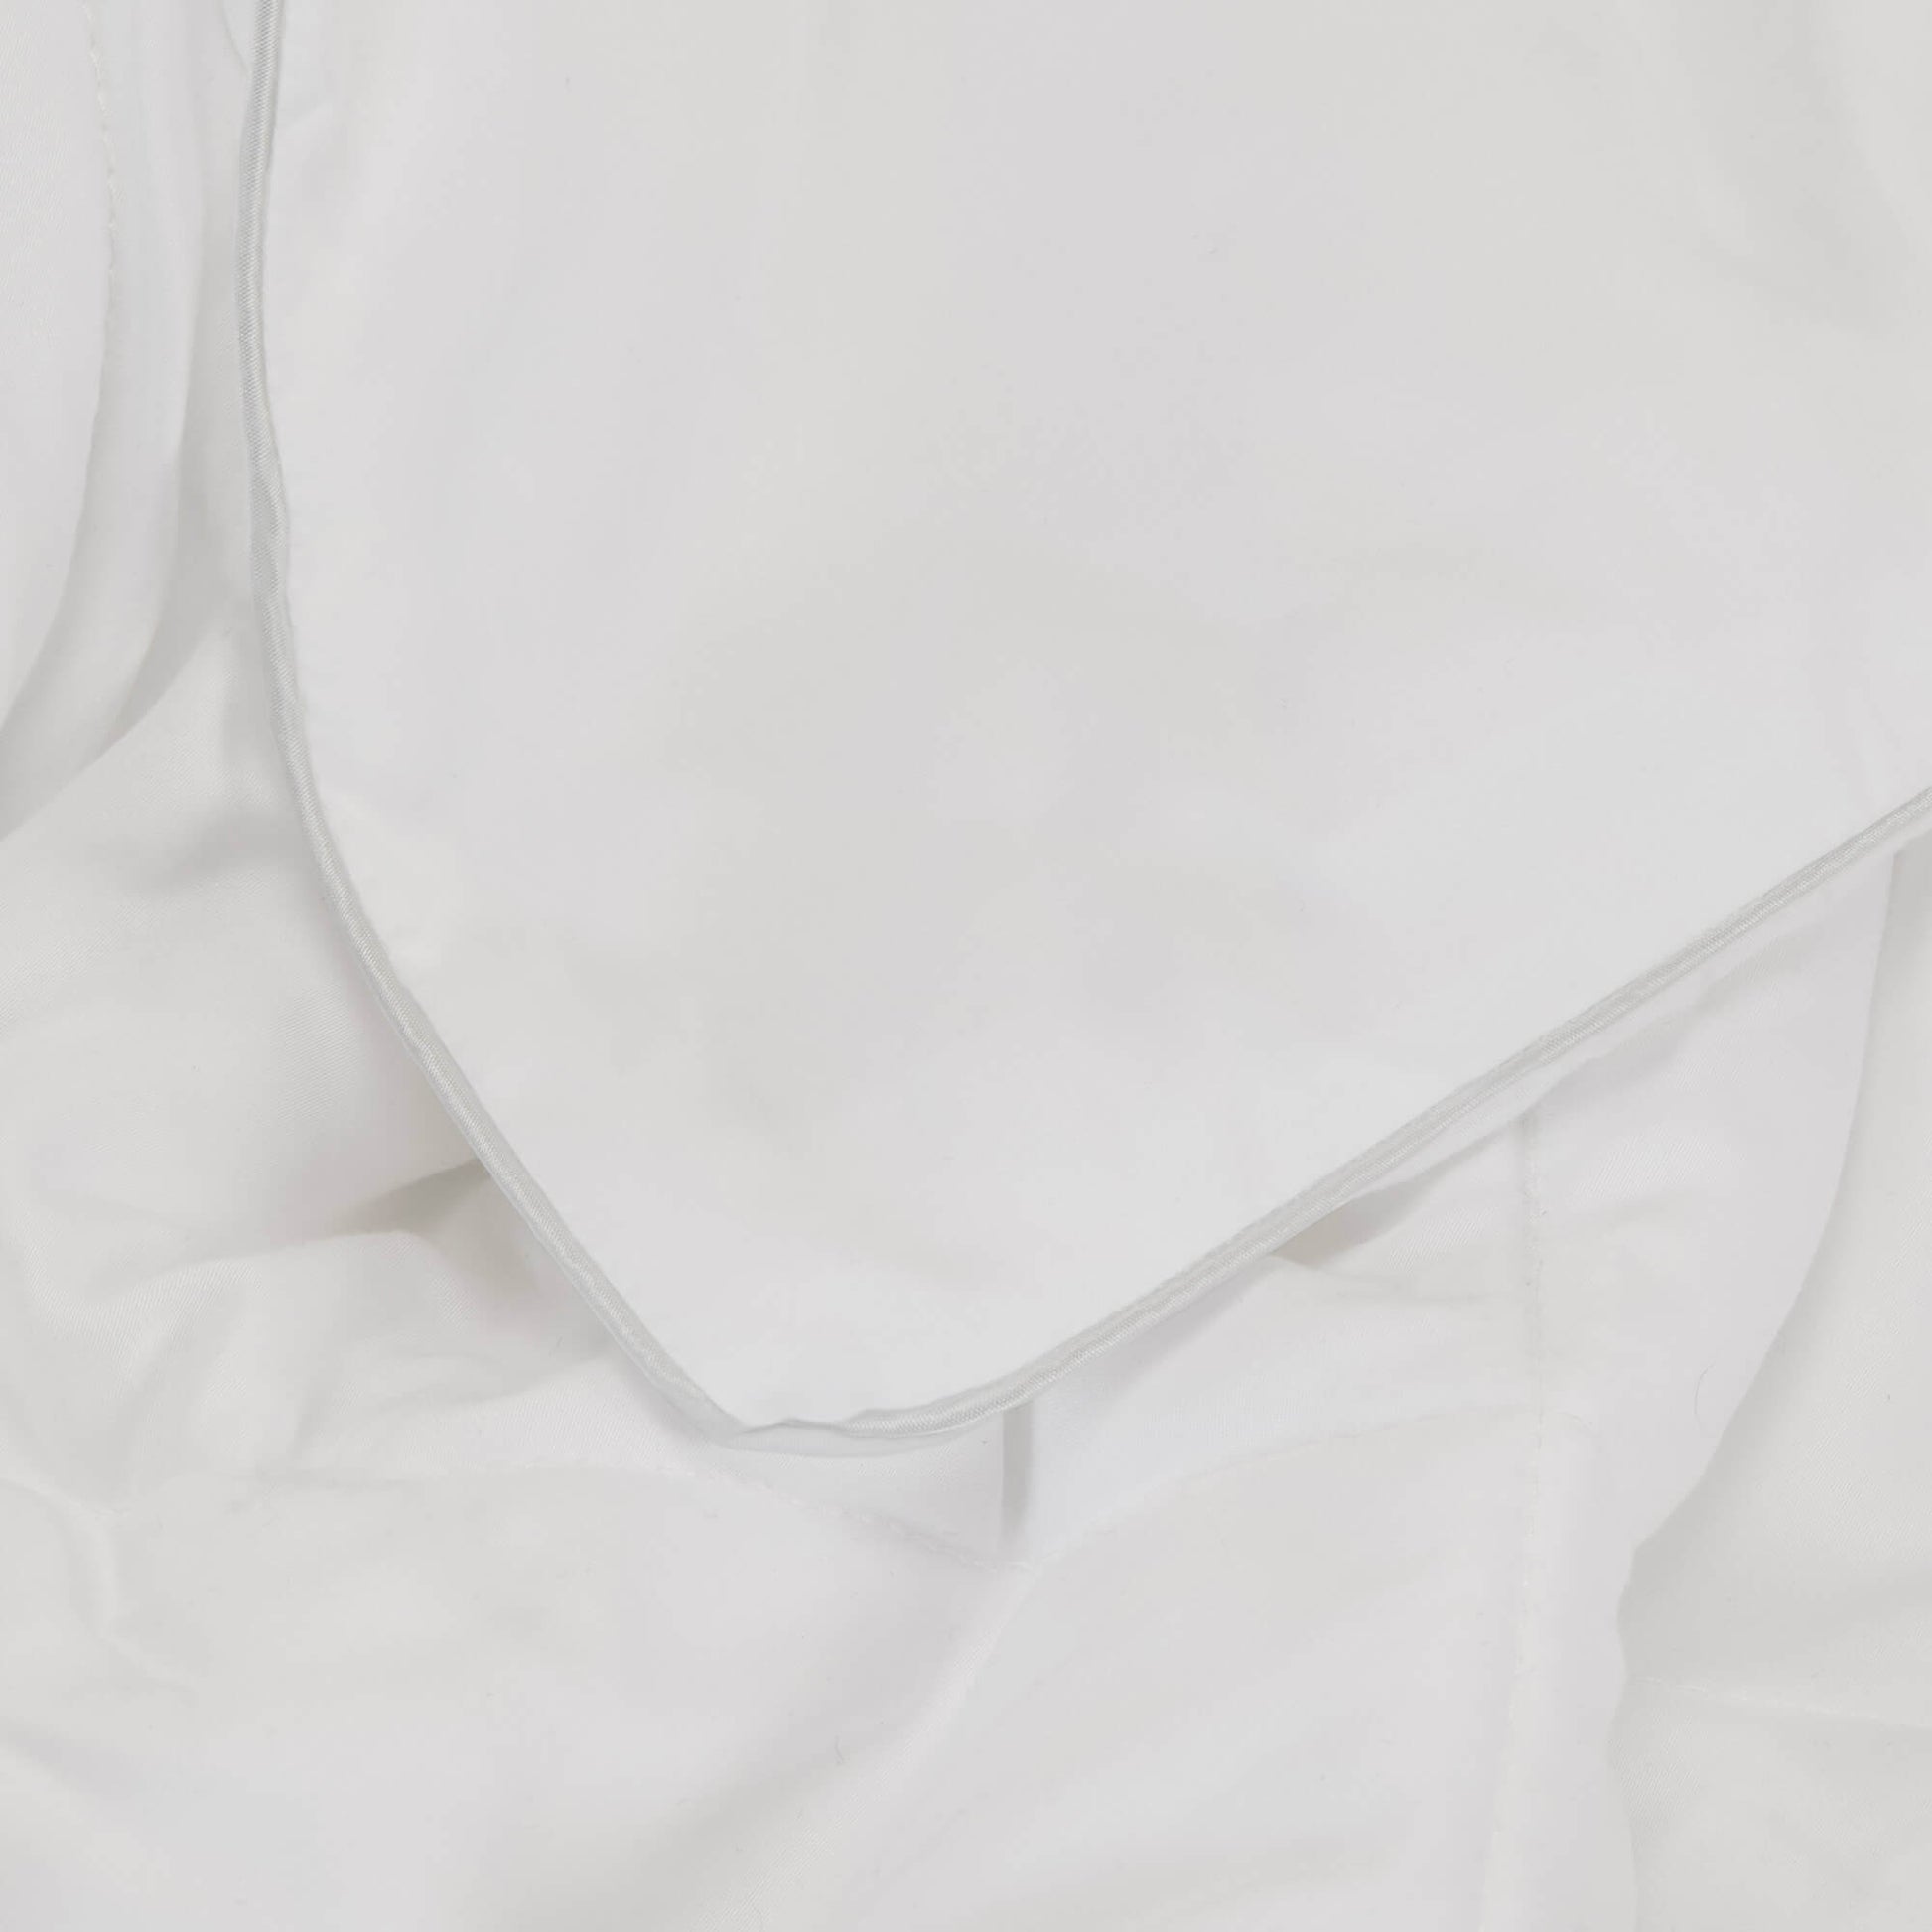 Detailed view of the piping on the Slumber Cloud UltraCool Comforter takes the ClimaDry™ by Outlast and pairs it with an 89% cooling nylon and 11% spandex outer cover that mimics silk creating the silky smooth and soft to the touch hand feel.